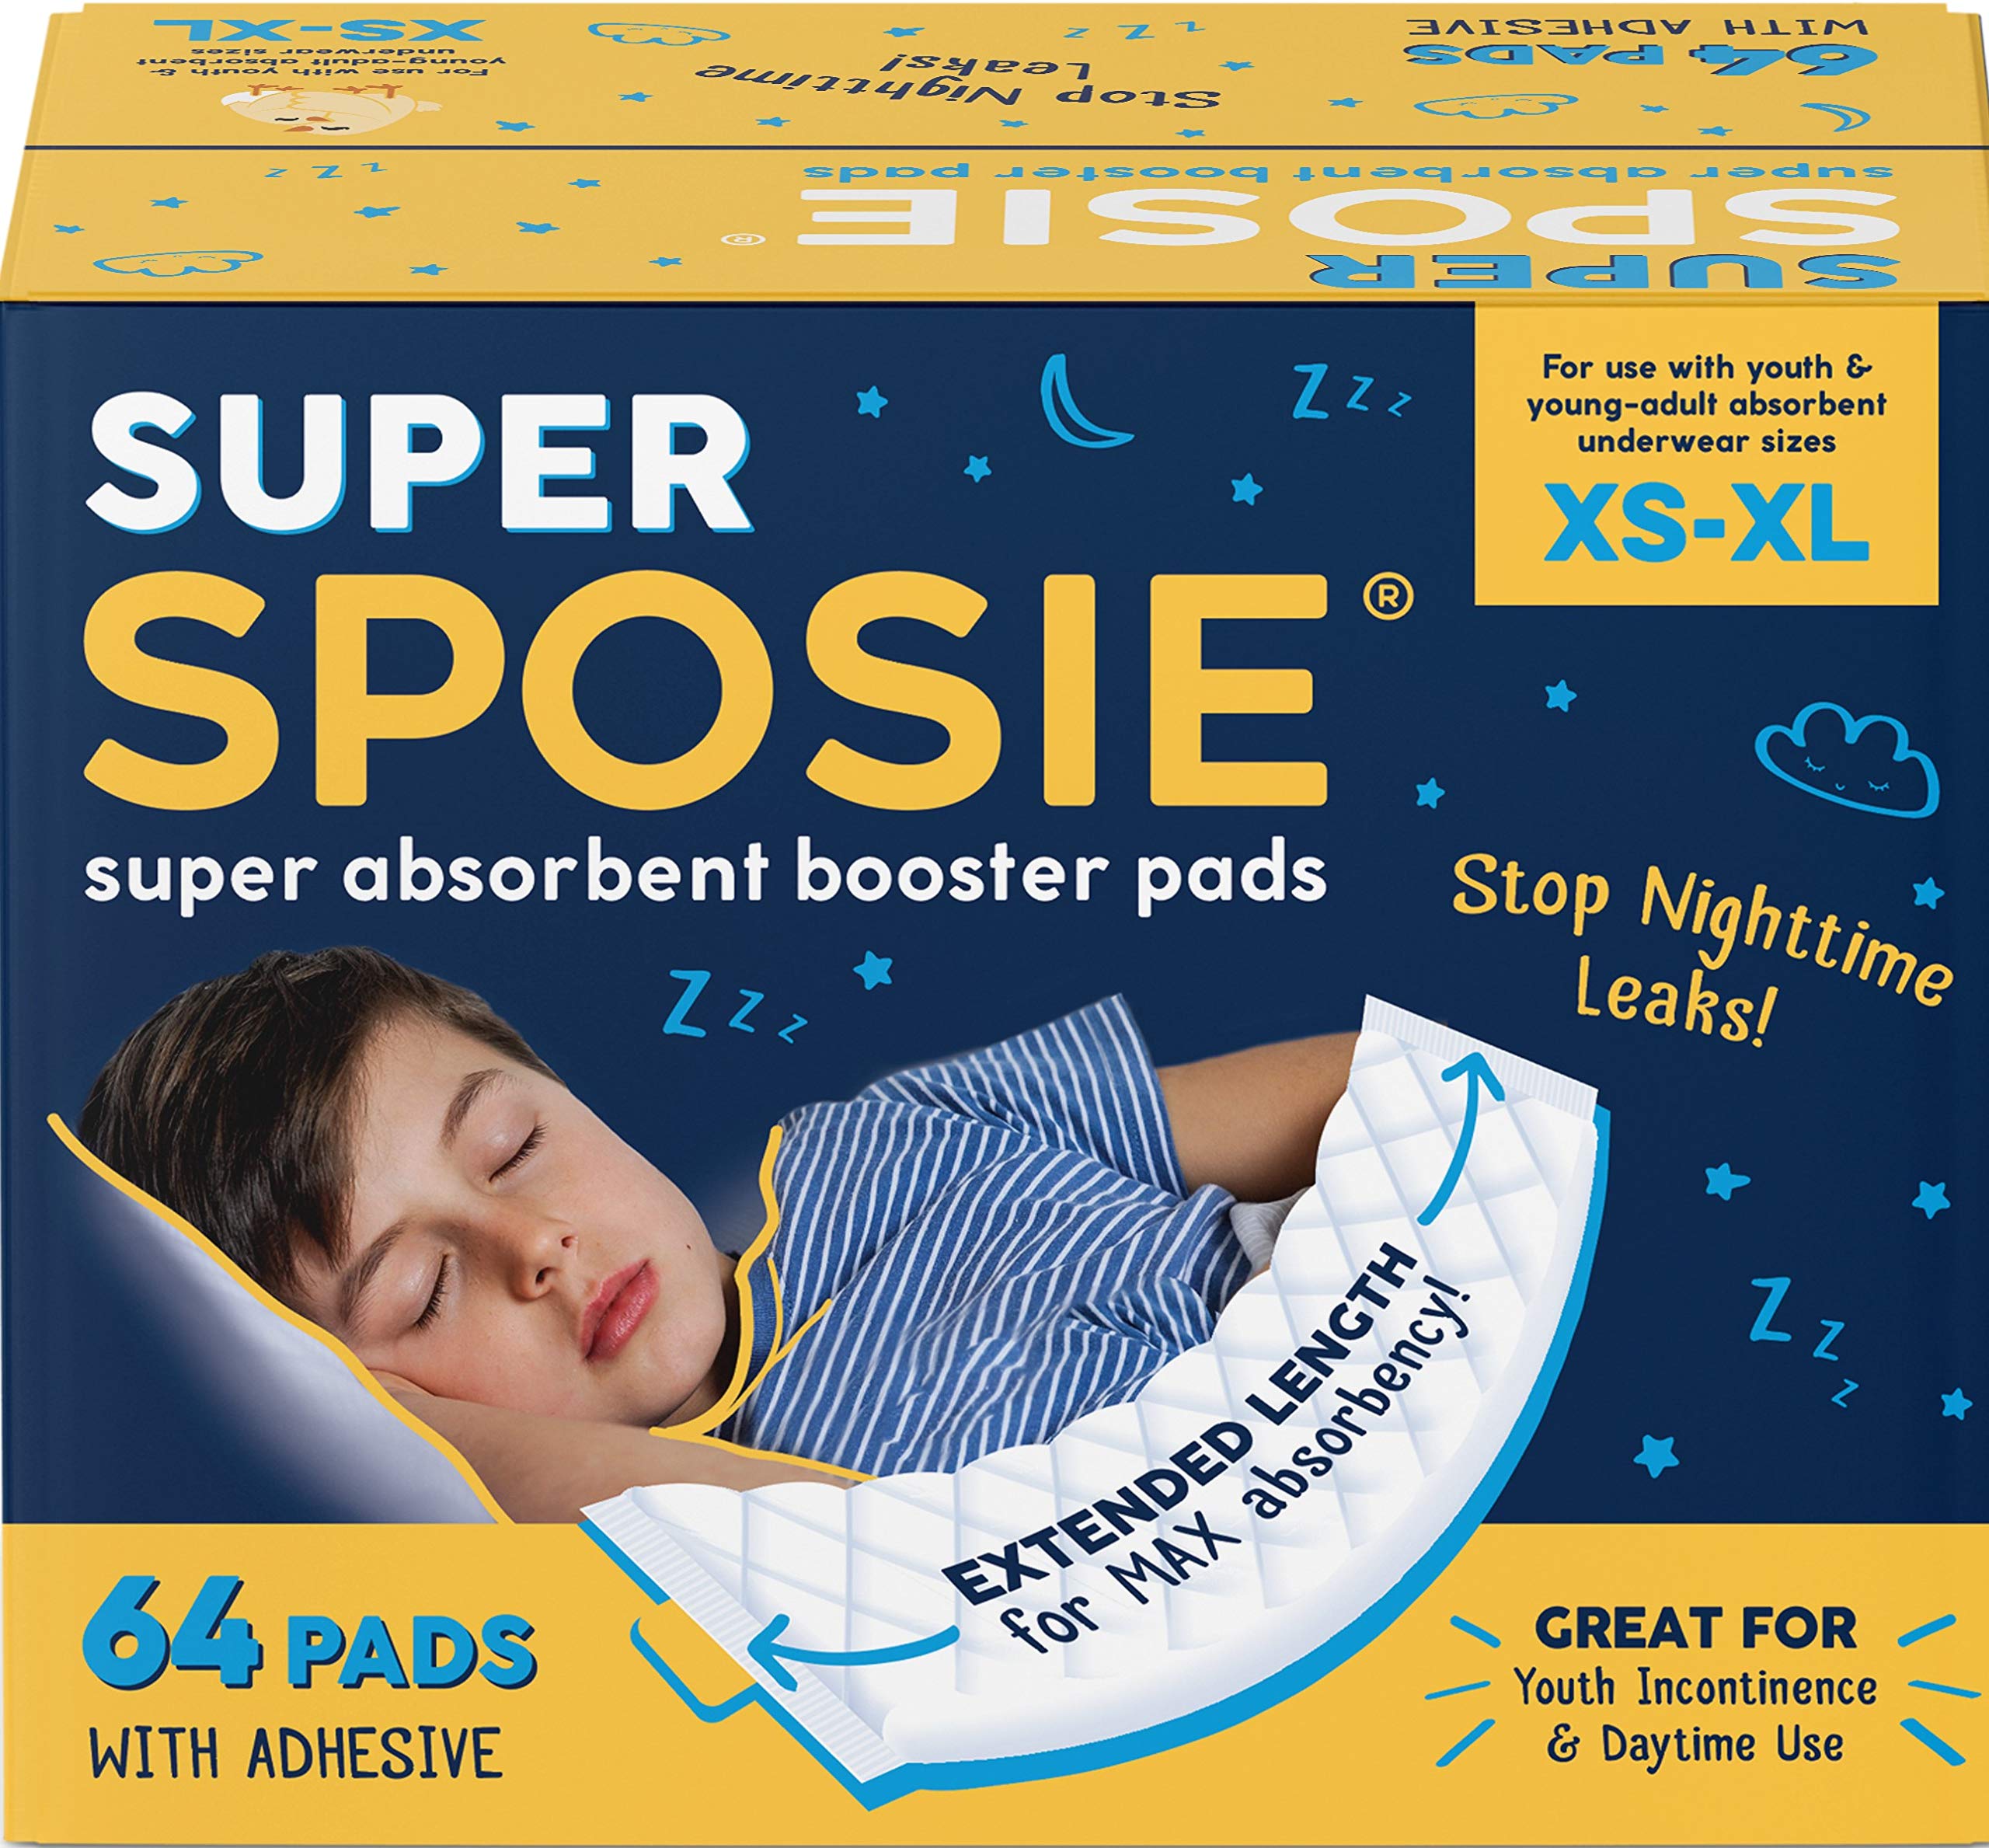 Select Kids Super Sposie Booster Pads for Overnight Diapers and Youth Incontinence, Maximum Absorbency to Stop Nighttime Diaper Leaks, Extra